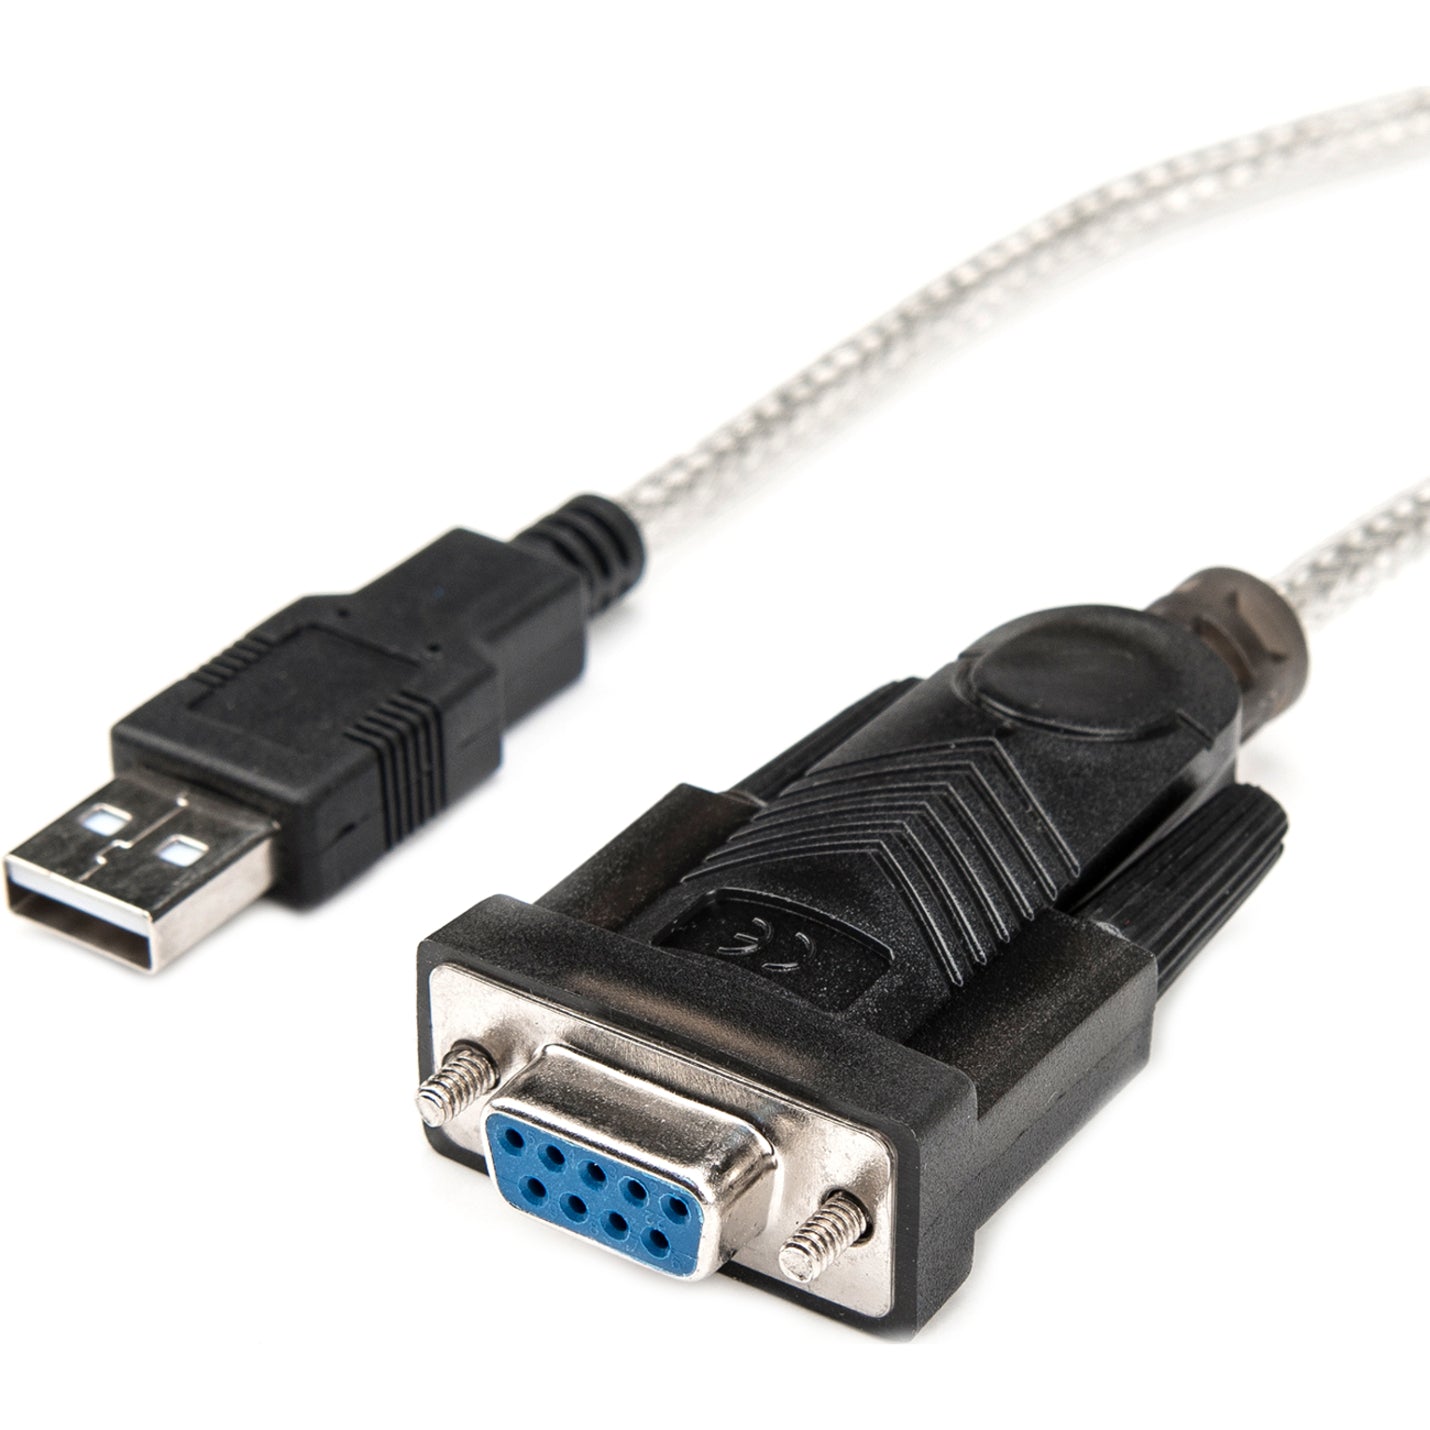 Rocstor Premium 5ft 1 Port USB to Null Modem RS232 DB9 Serial DCE Adapter Cable with FTDI - 1 x DB-9 Female Serial - 1 x USB Type A Male - Black - RS232 Serial Adapter